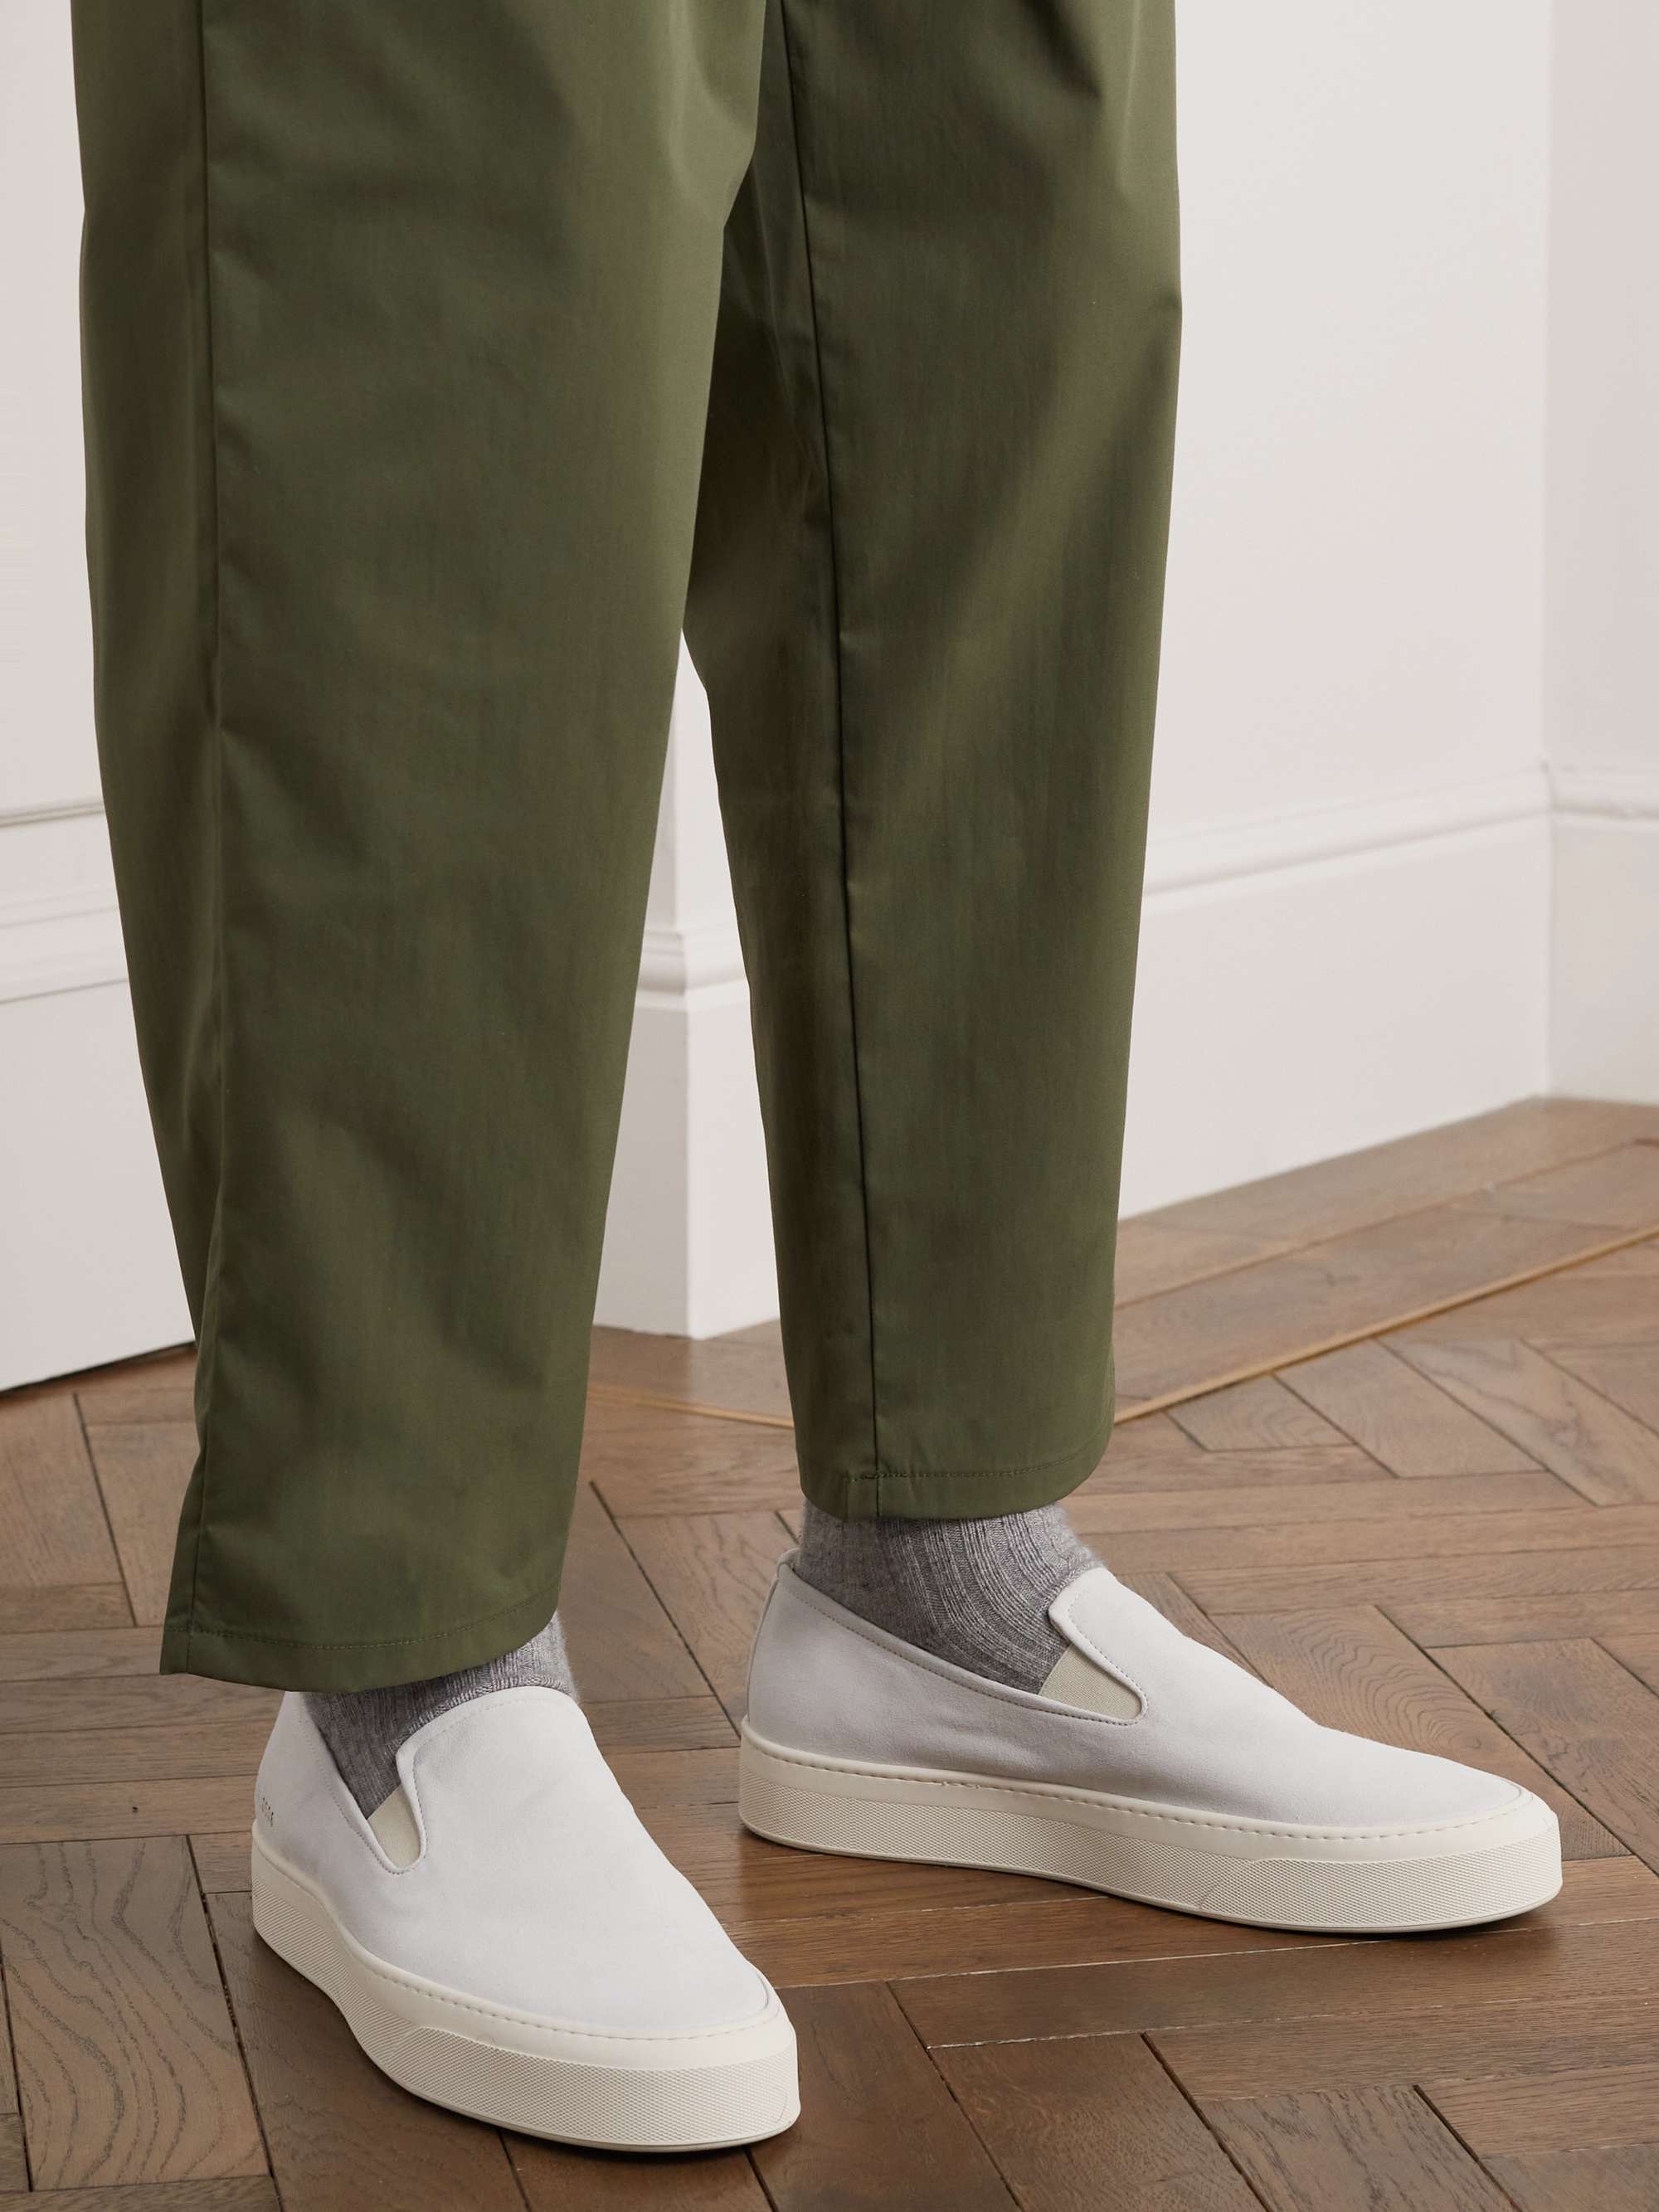 COMMON PROJECTS Suede Slip-On Sneakers